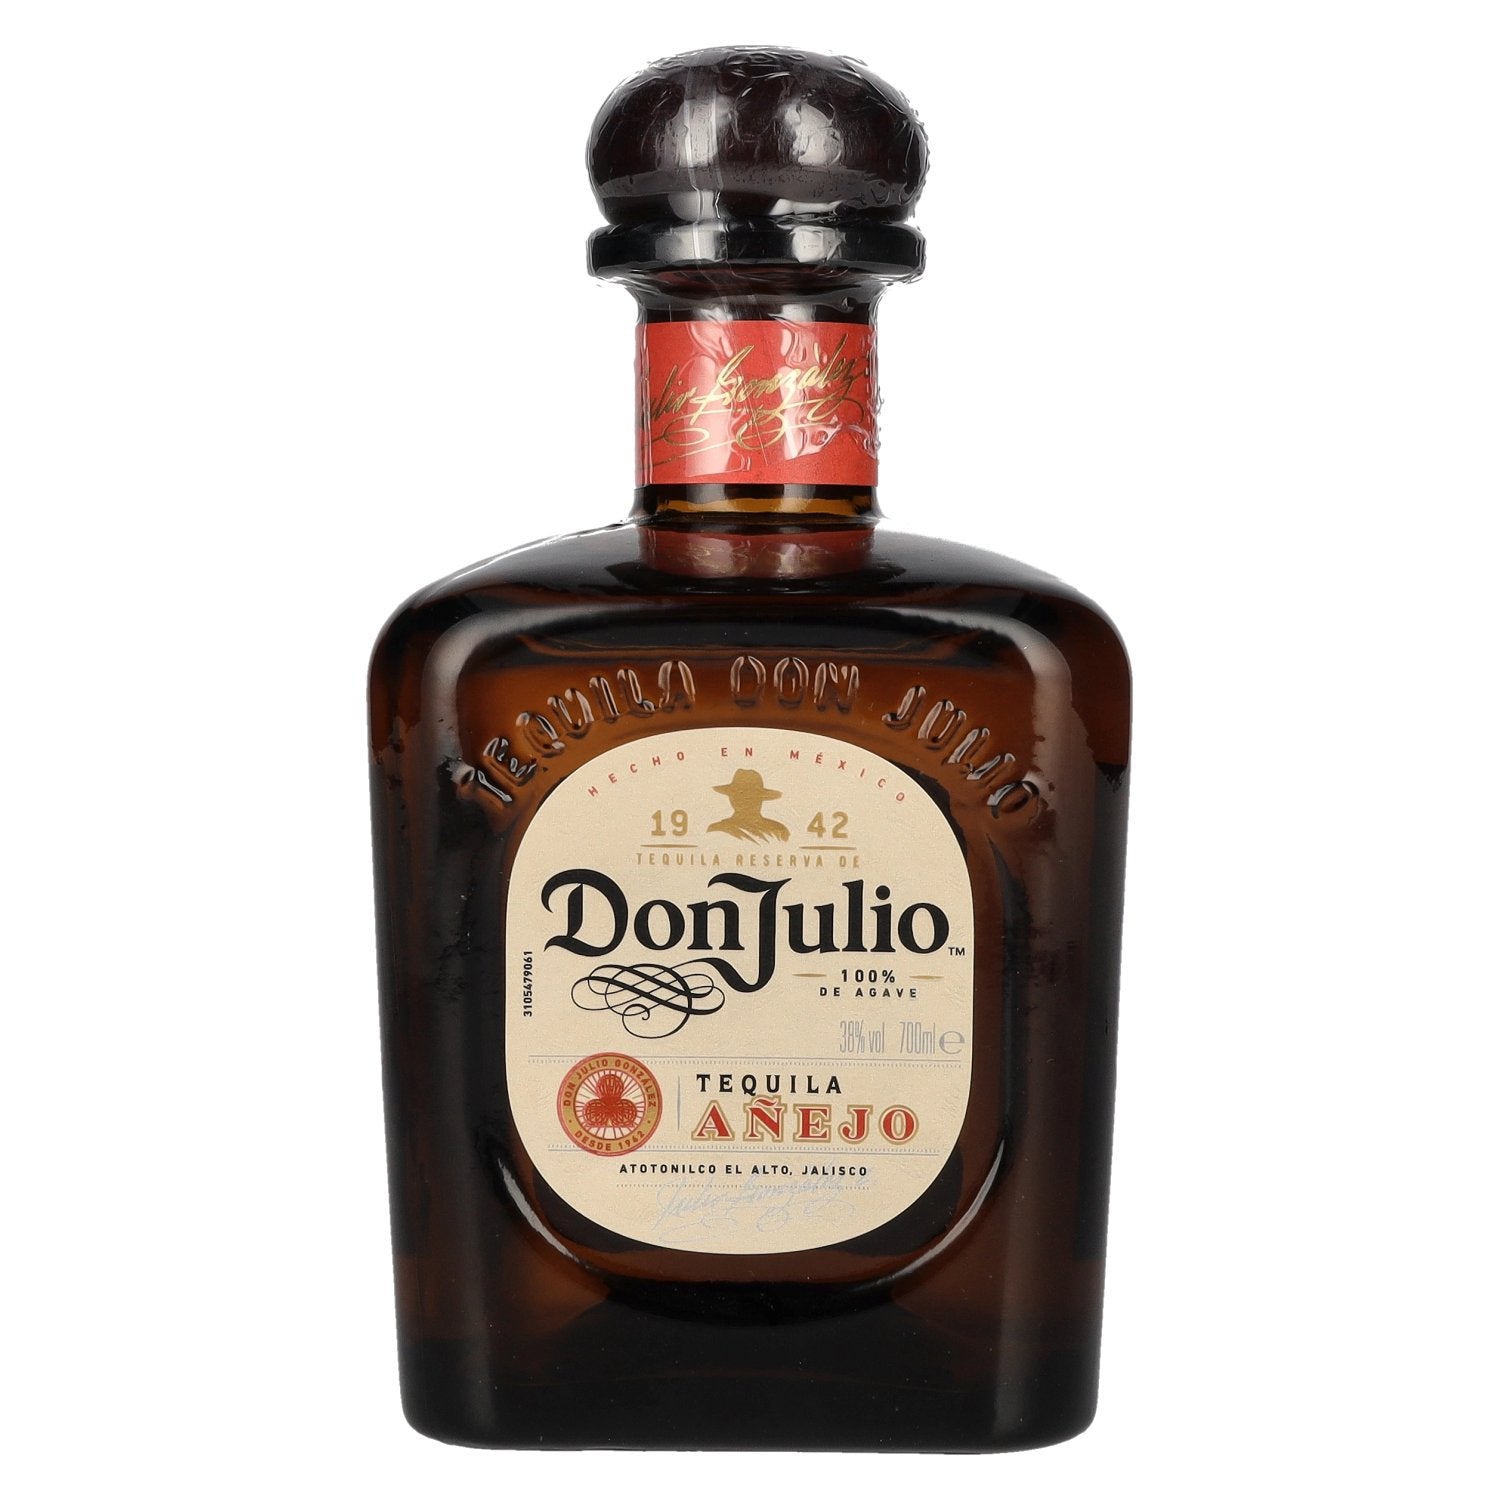 Don Julio Tequila Anejo 100% Agave 38% Vol. 0,7l